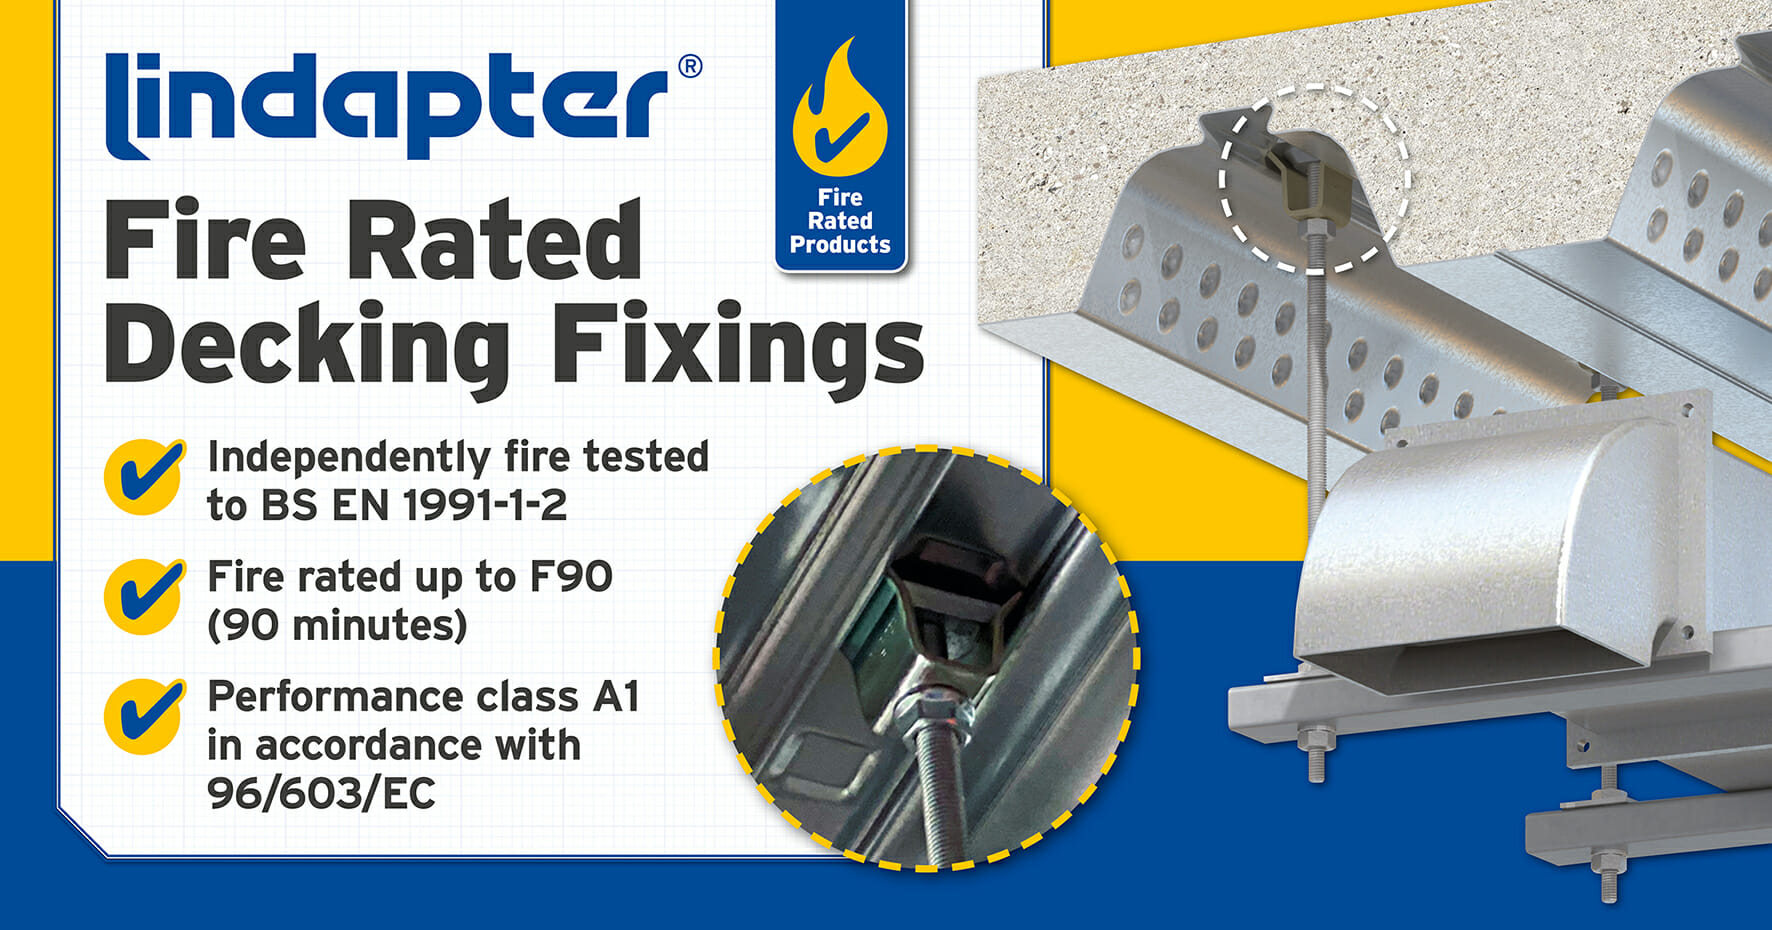 Lindapter fire rated range of Decking Fixings @Lindapter